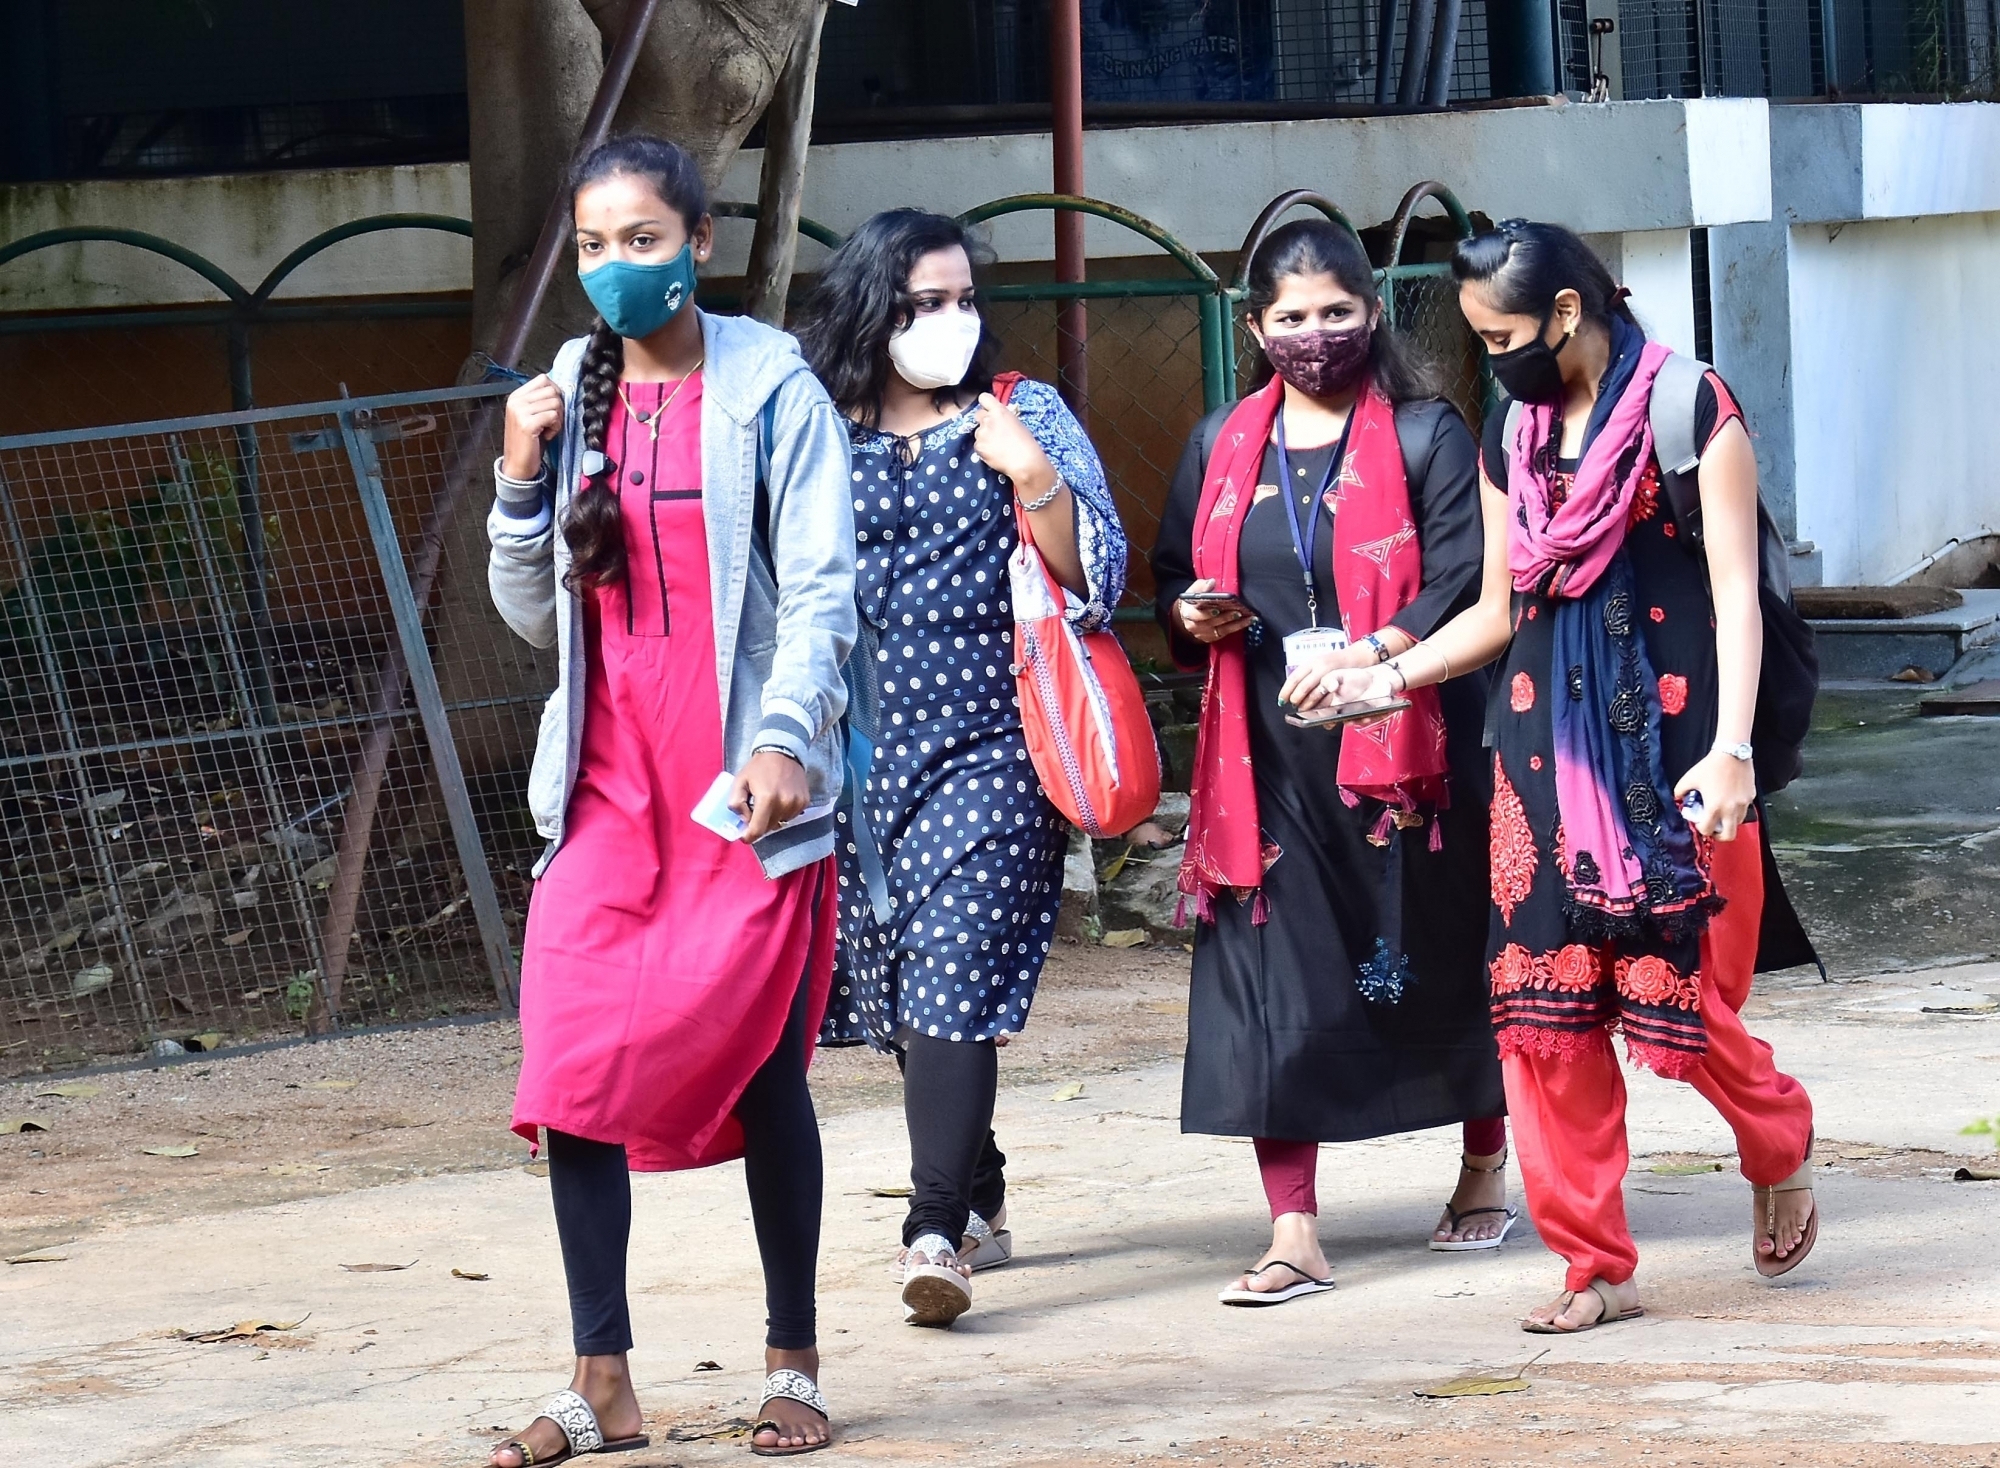 Bengaluru: After being closed for eight months, degree colleges in Karnataka reopened amidst several precautionary measures during the COVID-19 pandemic, in Bengaluru on Nov 17, 2020. (Photo: IANS)